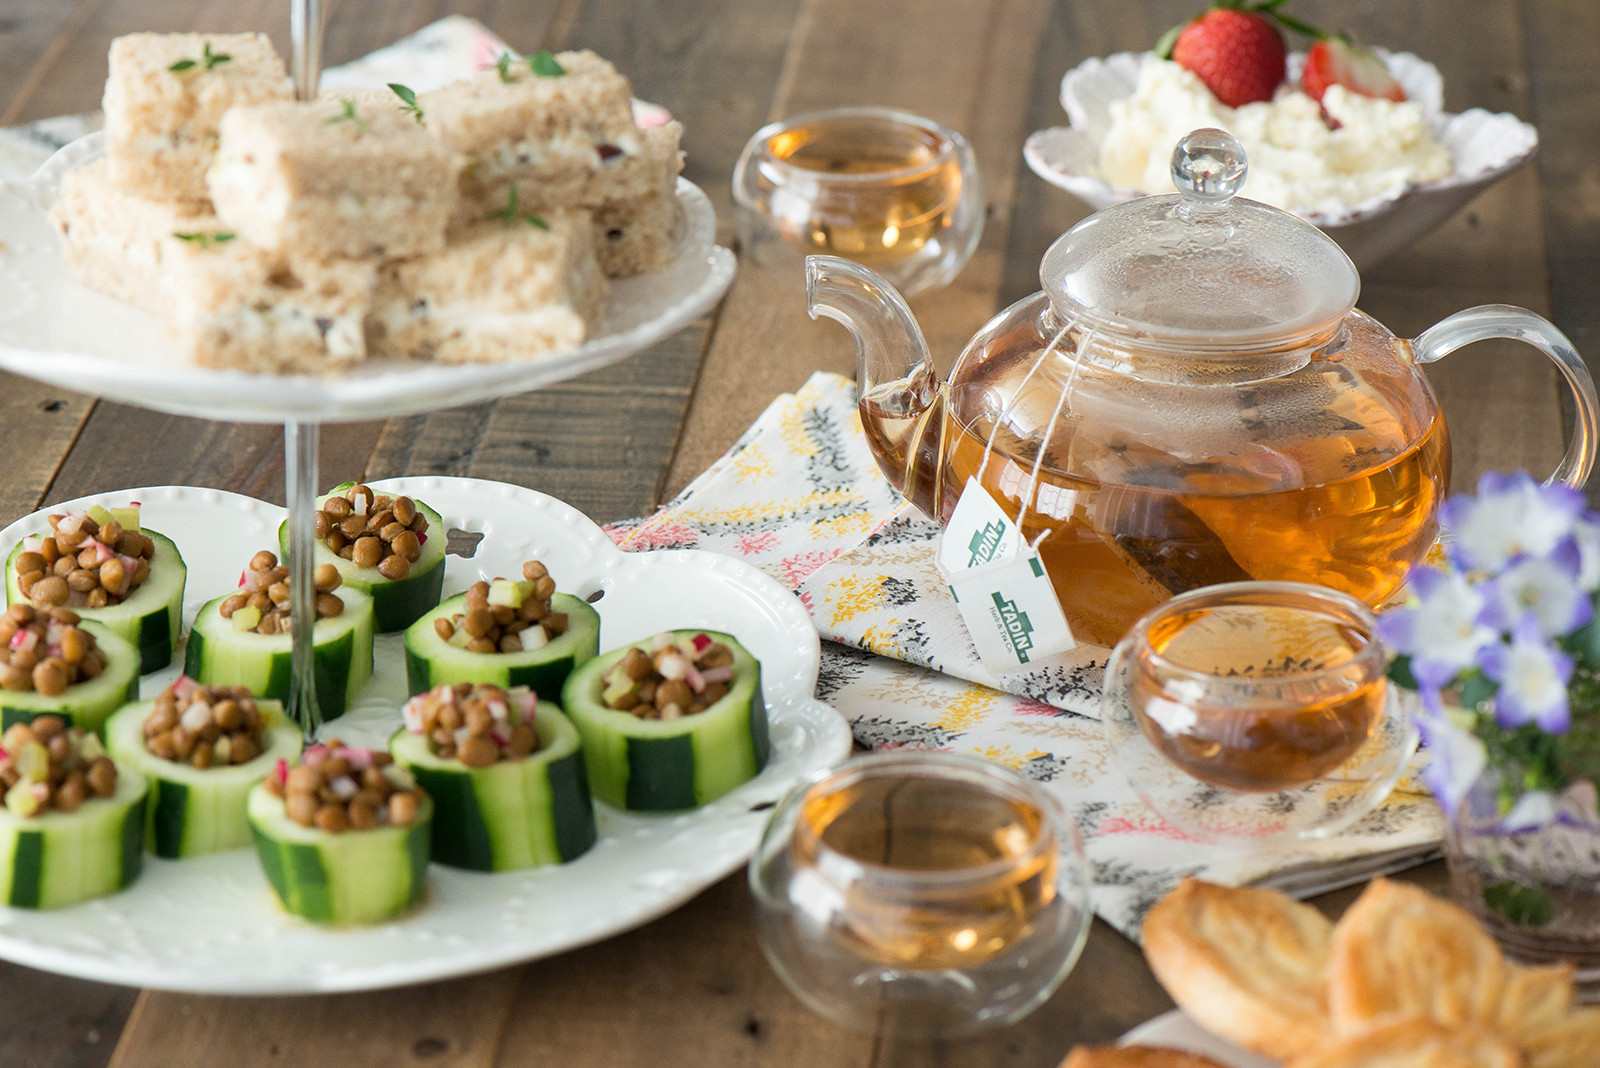 Tea Party Snack Ideas
 A Simple Tea Party Menu Nibbles and Feasts